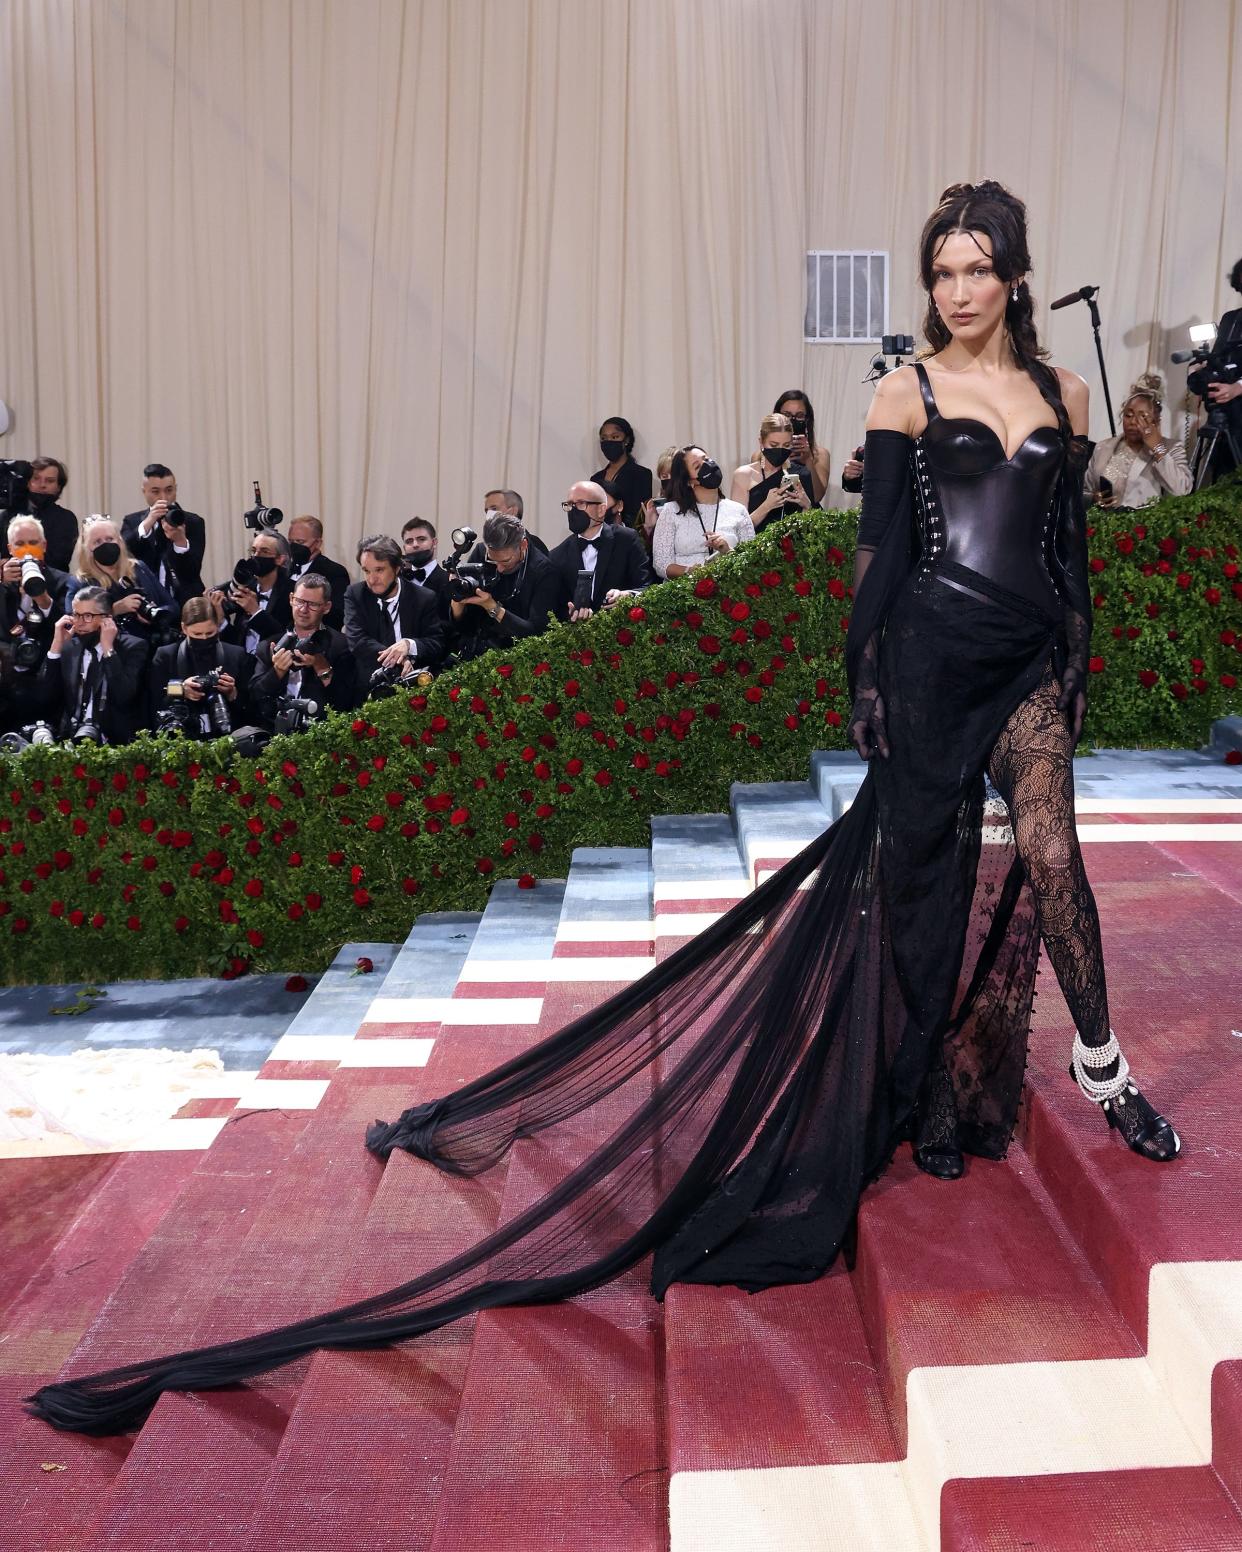 Bella Hadid in a black dress with a long train at the 2022 Met Gala